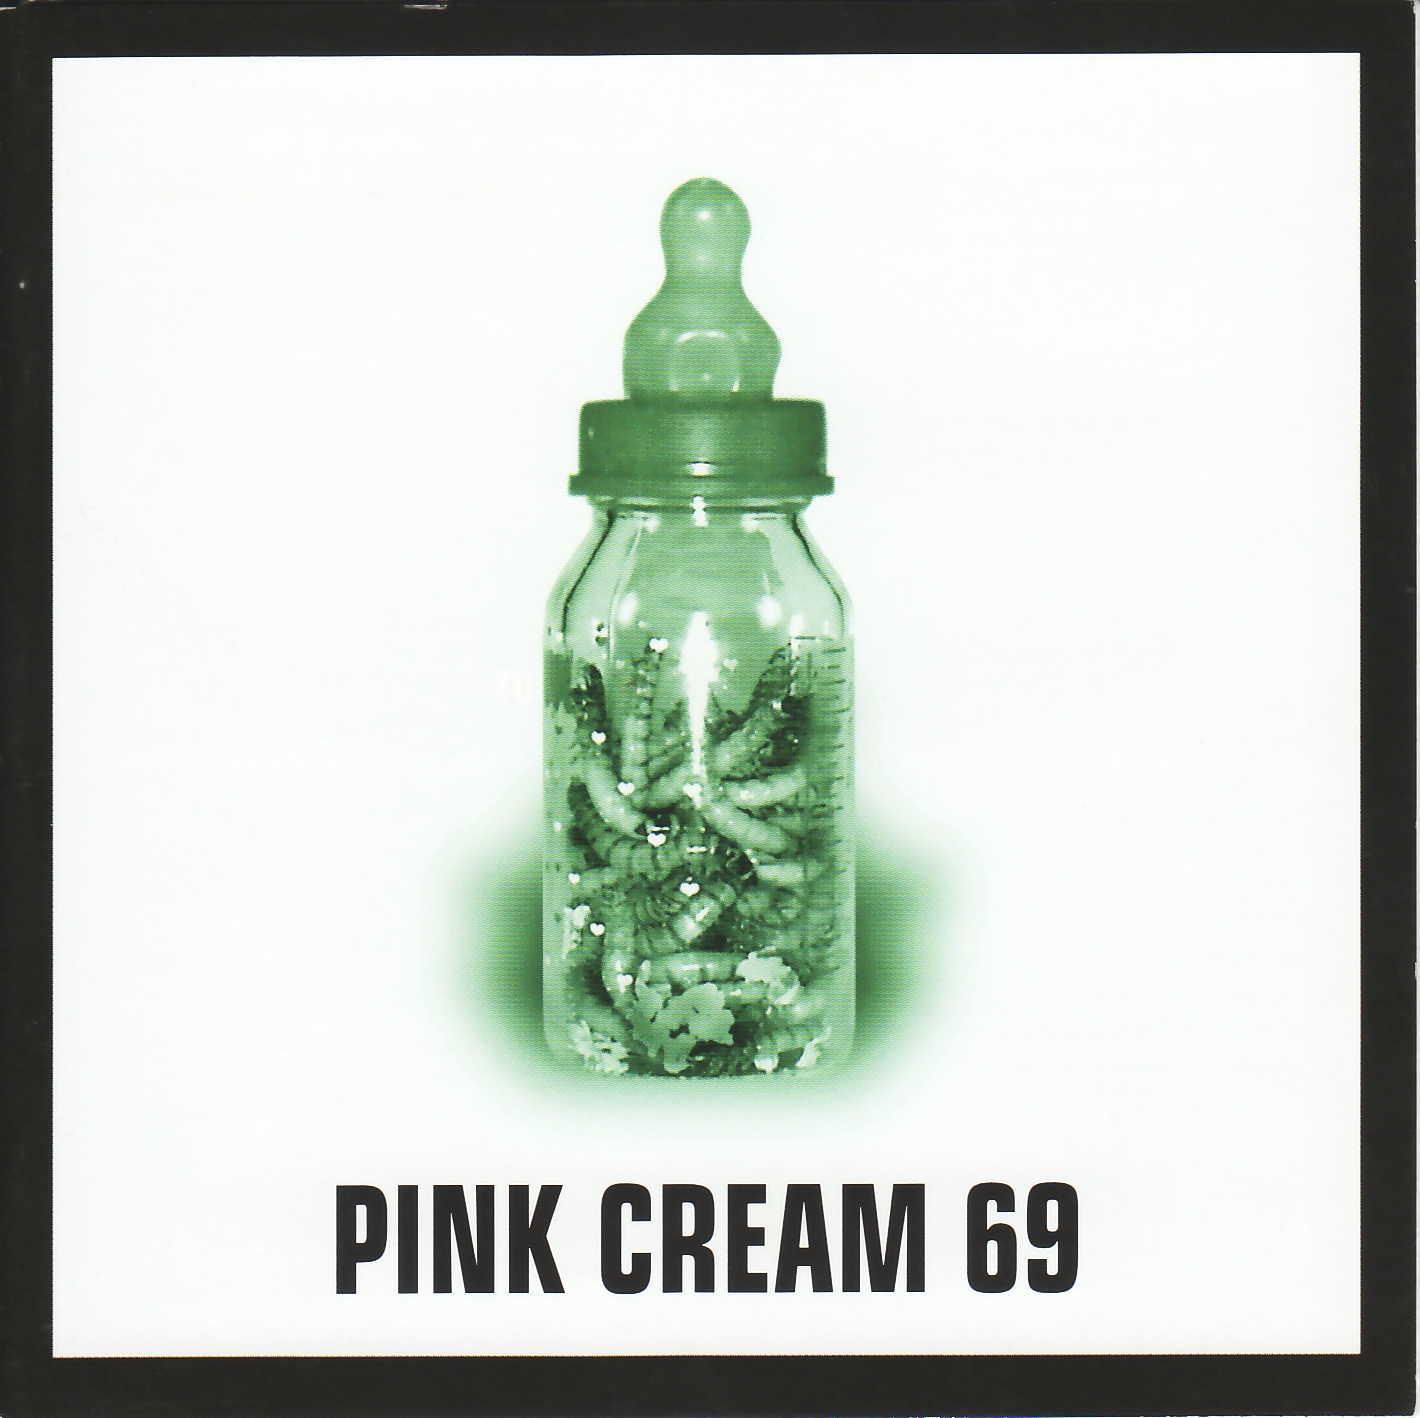 Pink Cream 69 (1997 Food for Thought)